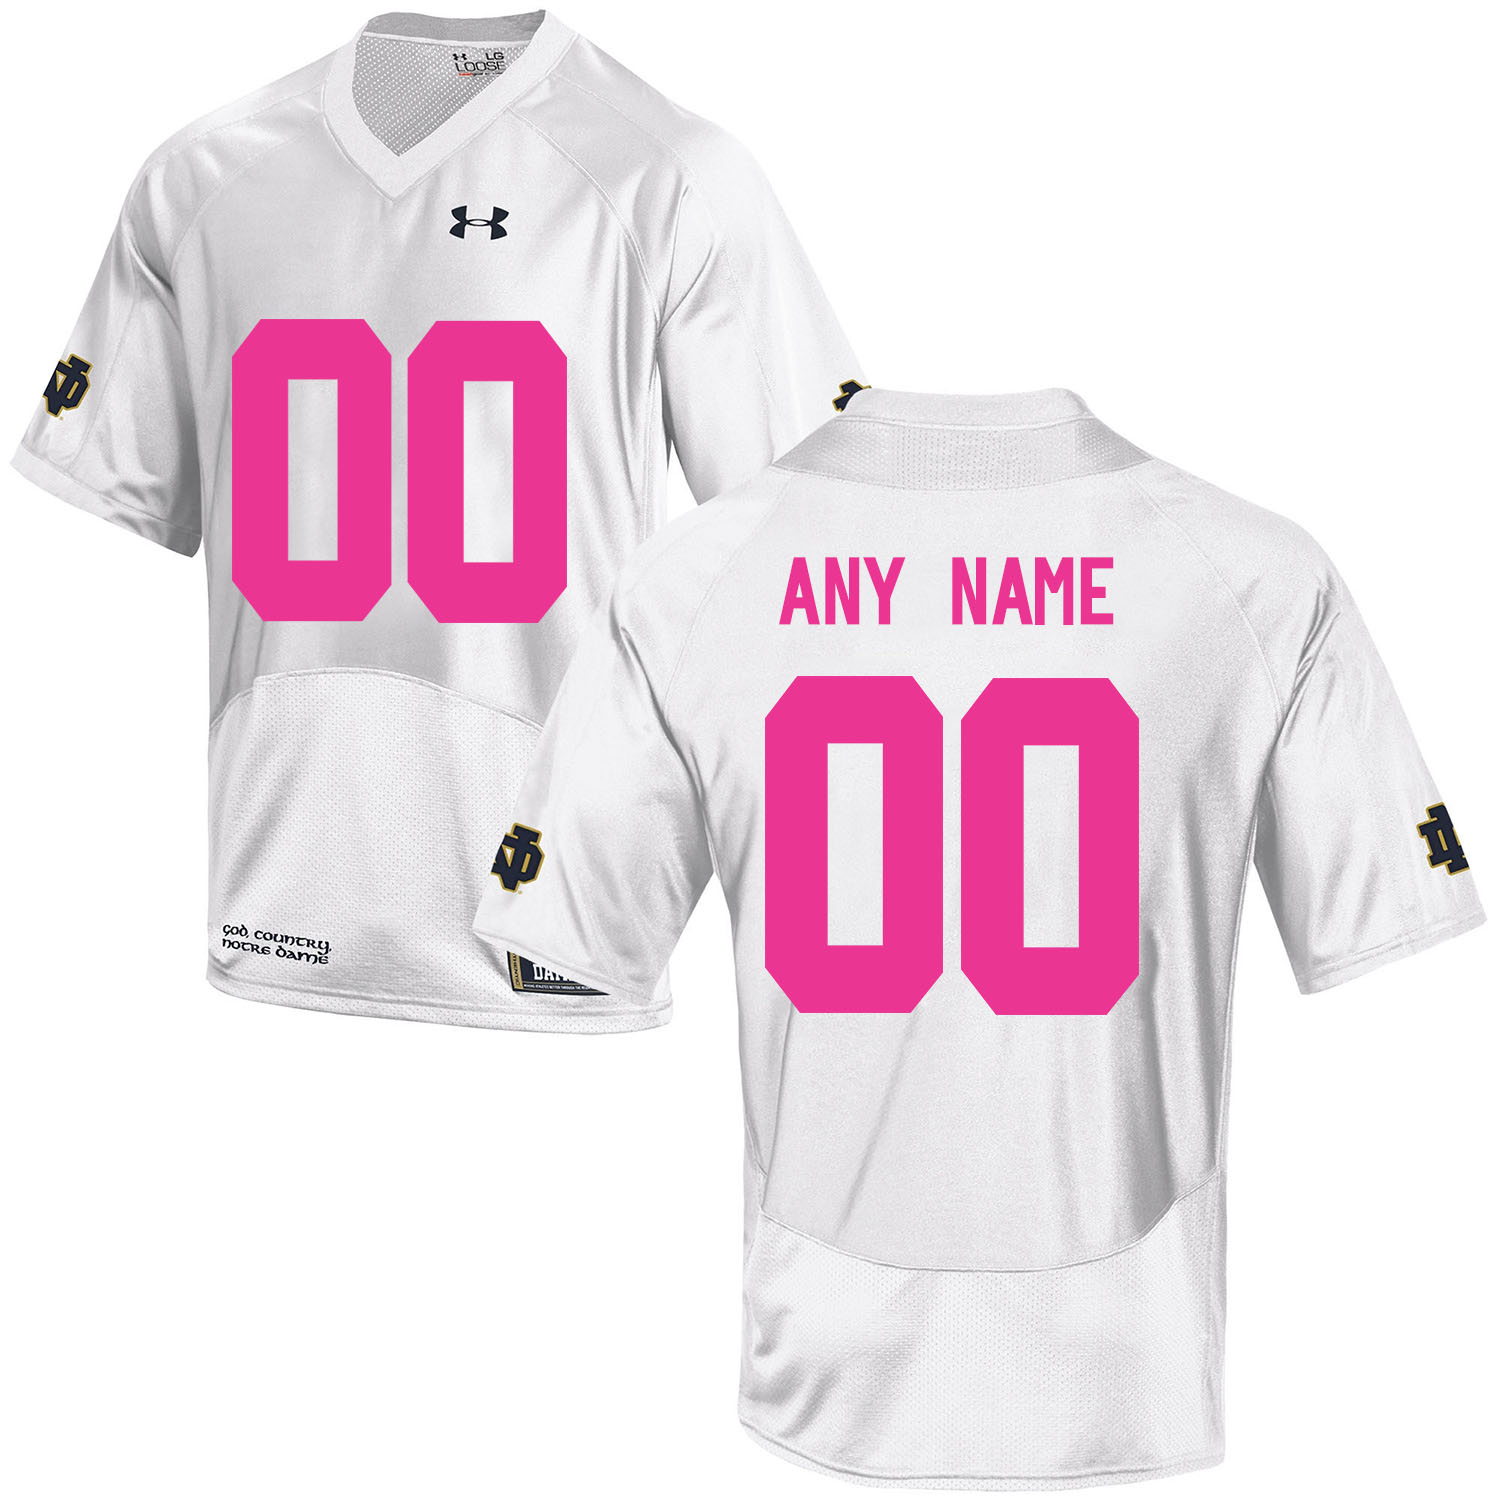 Notre Dame Fighting Irish White Men's Customized 2018 Breast Cancer Awareness College Football Jersey